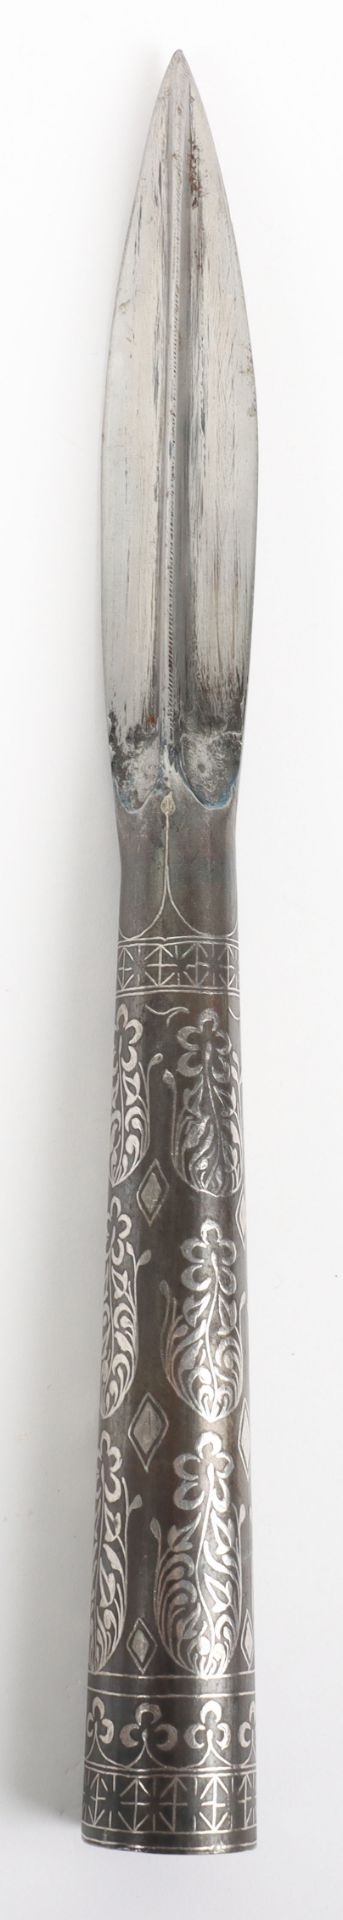 Finely Decorated Iron Head for an Indian Lance